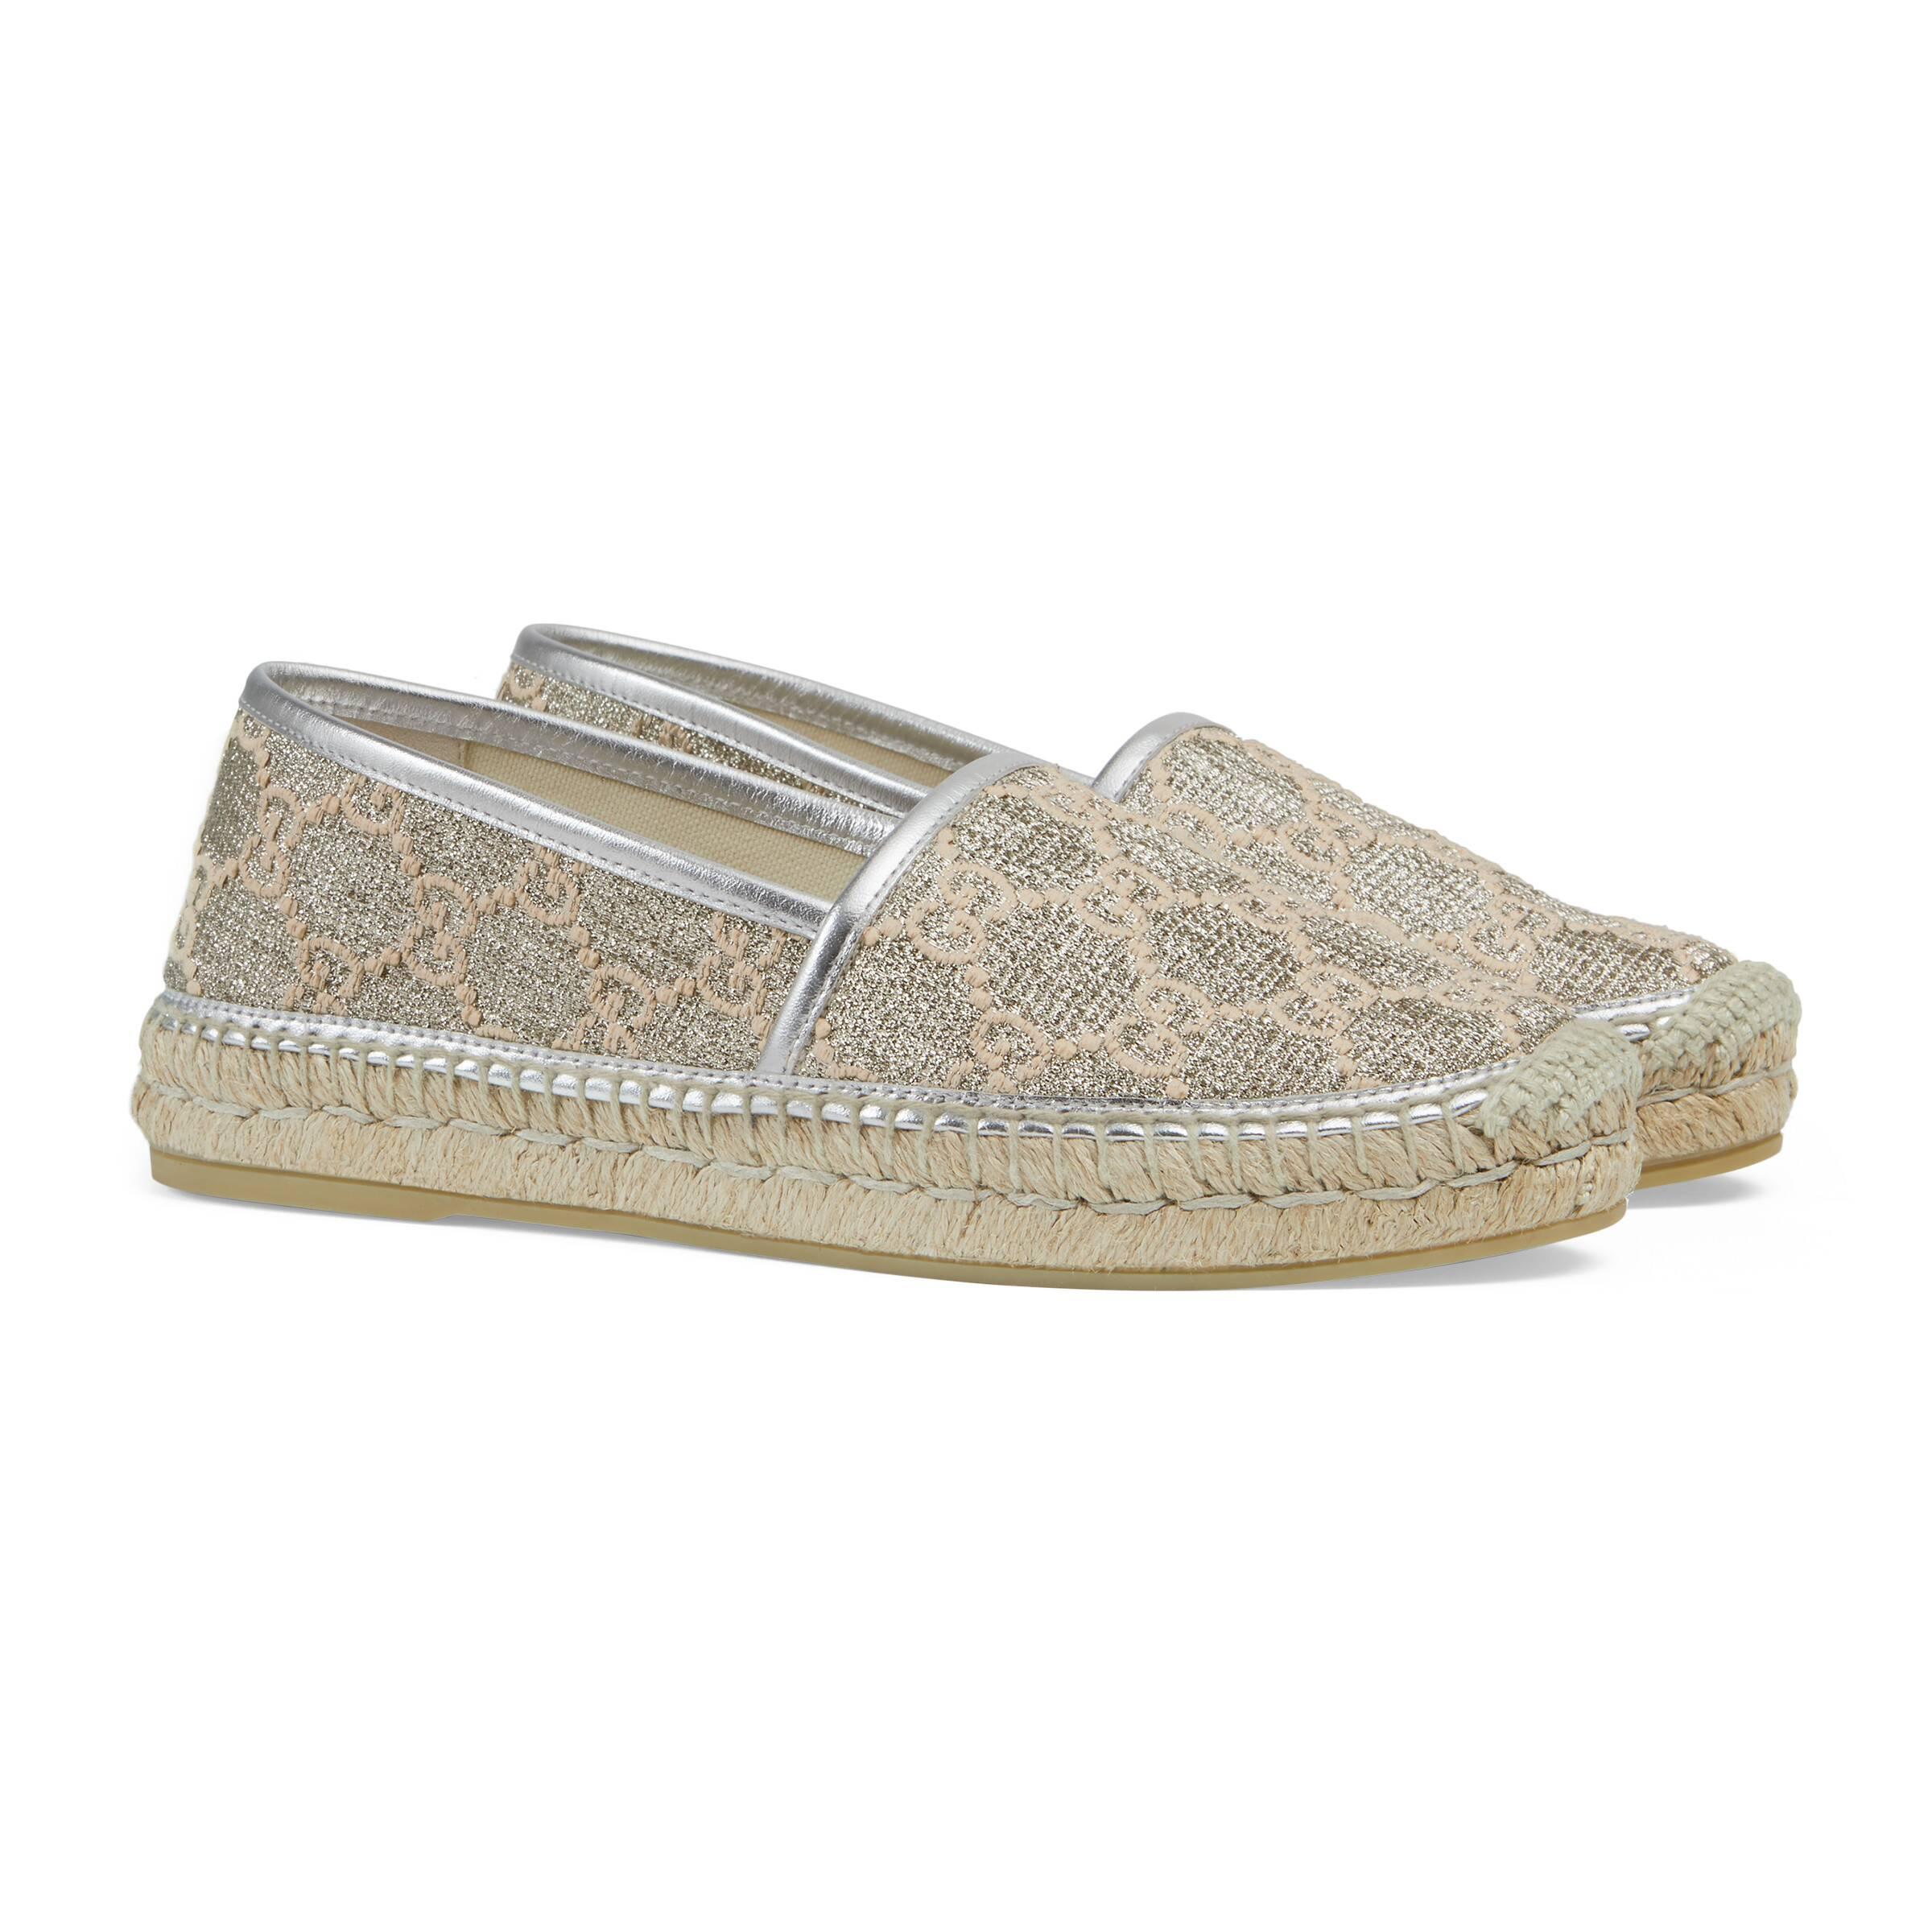 Gucci Rubber Heritage GG Lamé Espadrilles in Silver (Metallic) - Save 5 ...